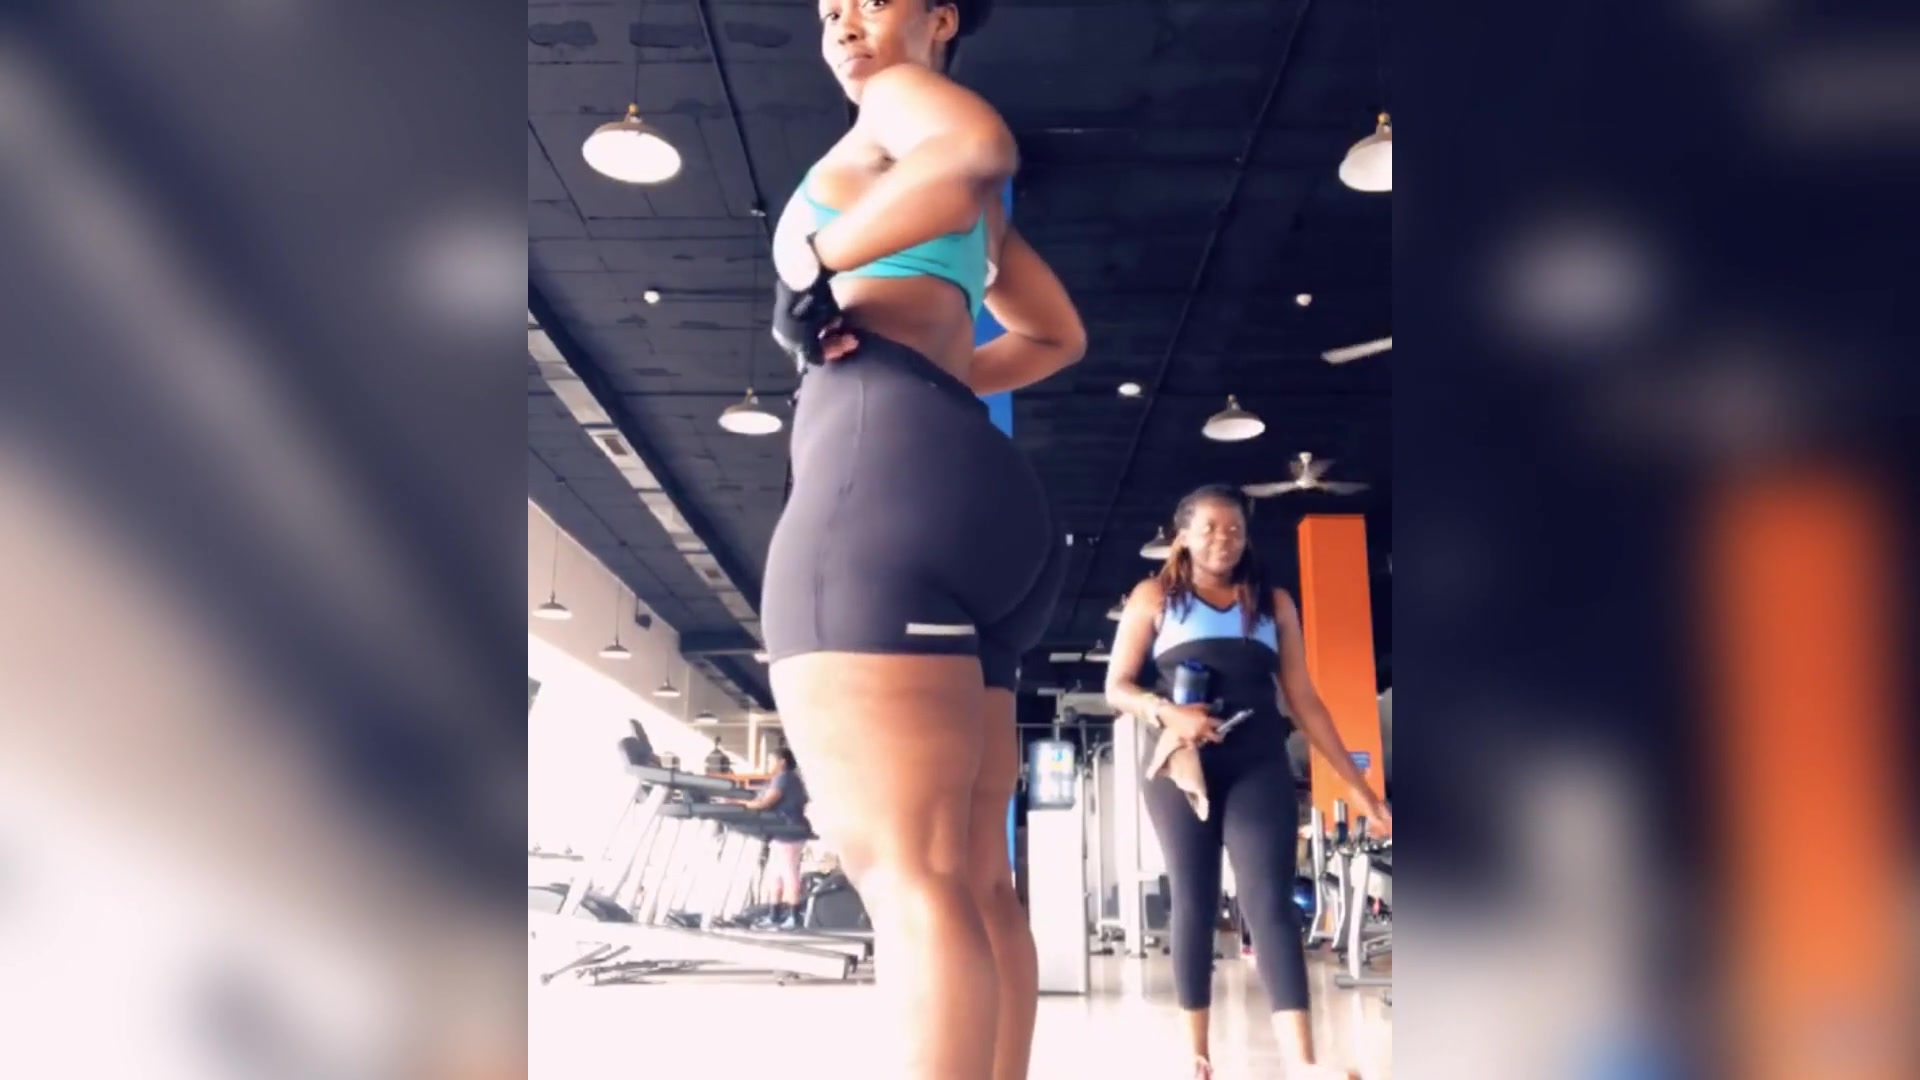 Big Black Ass Gym - Free Thick African Girl doing Big Booty Workout in Leggings [gym Video] Porn  Video - Ebony 8